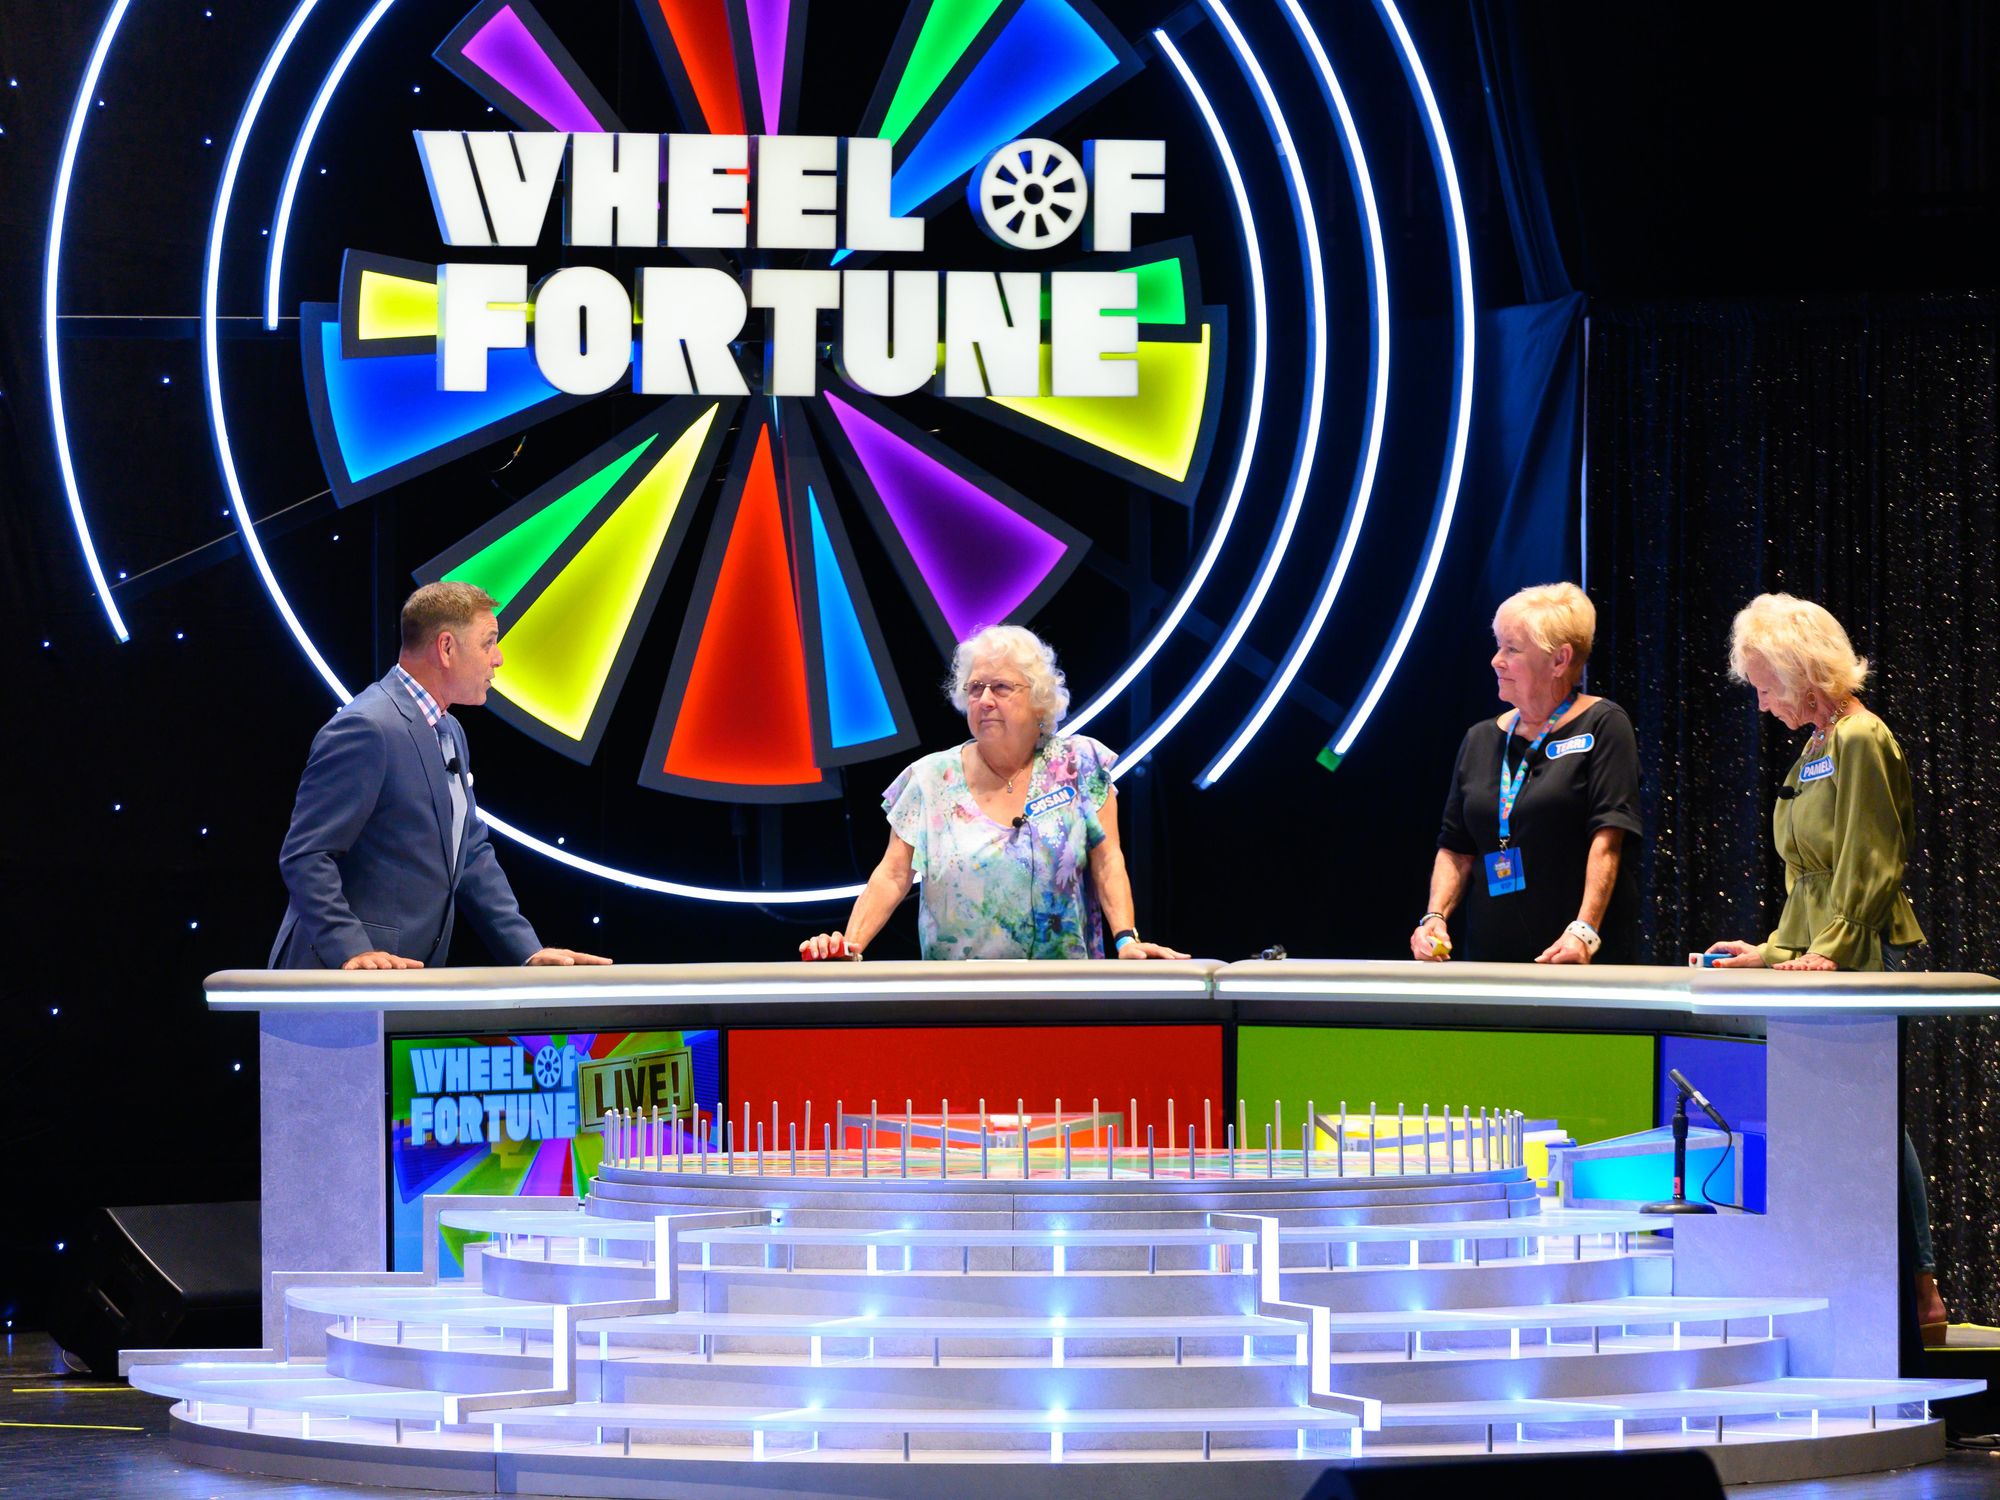 Participants on Wheel of Fortune Live